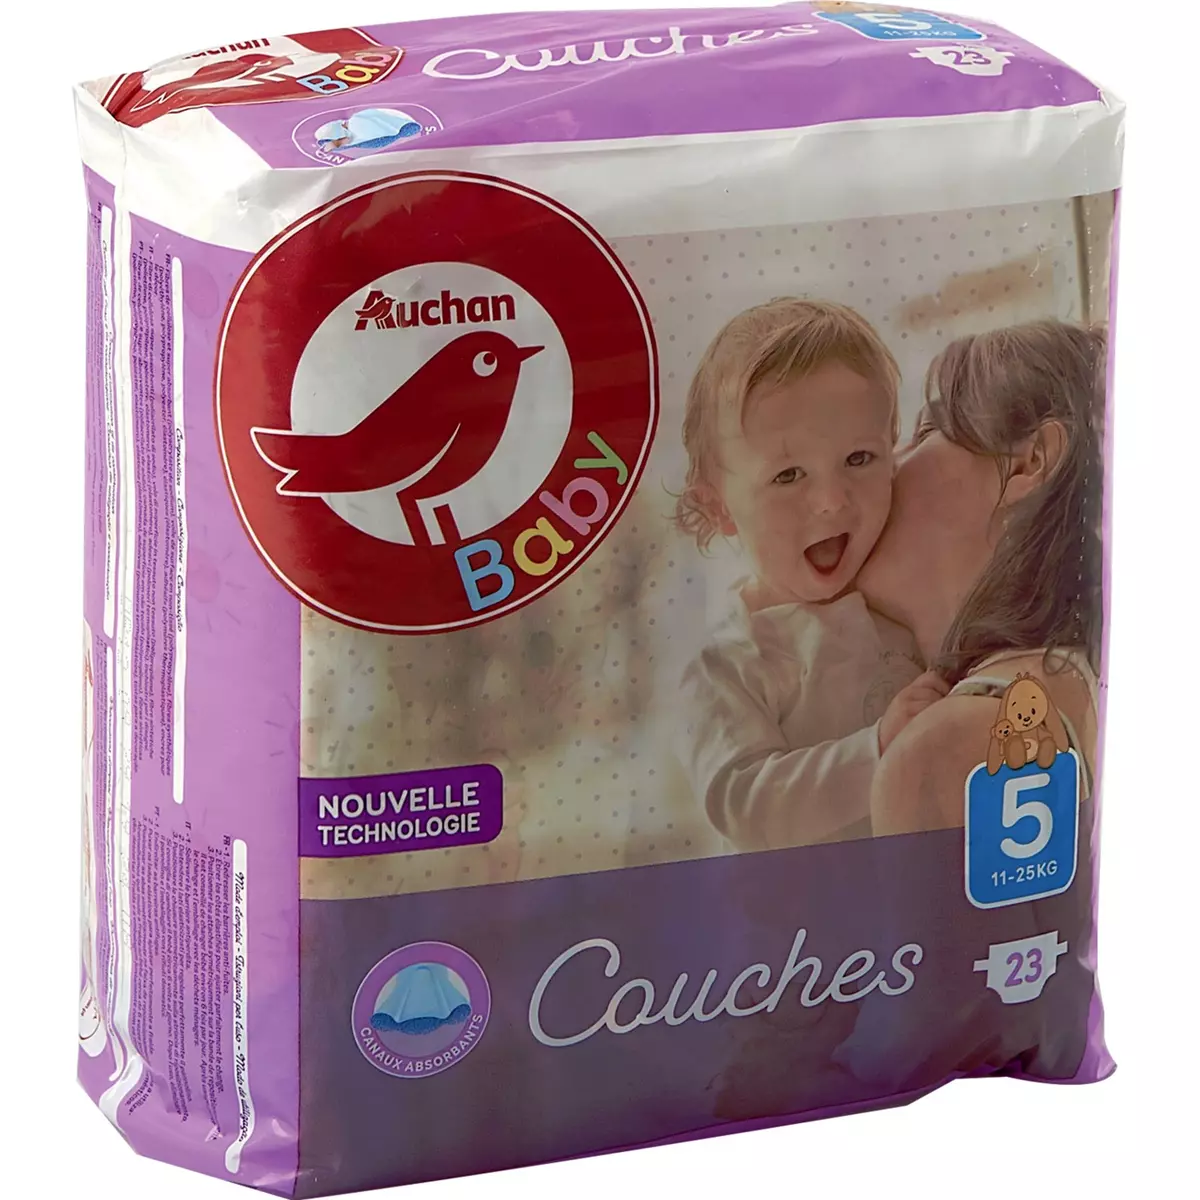 AUCHAN BABY Couches taille 5 (11-25kg) 23 couches pas cher 